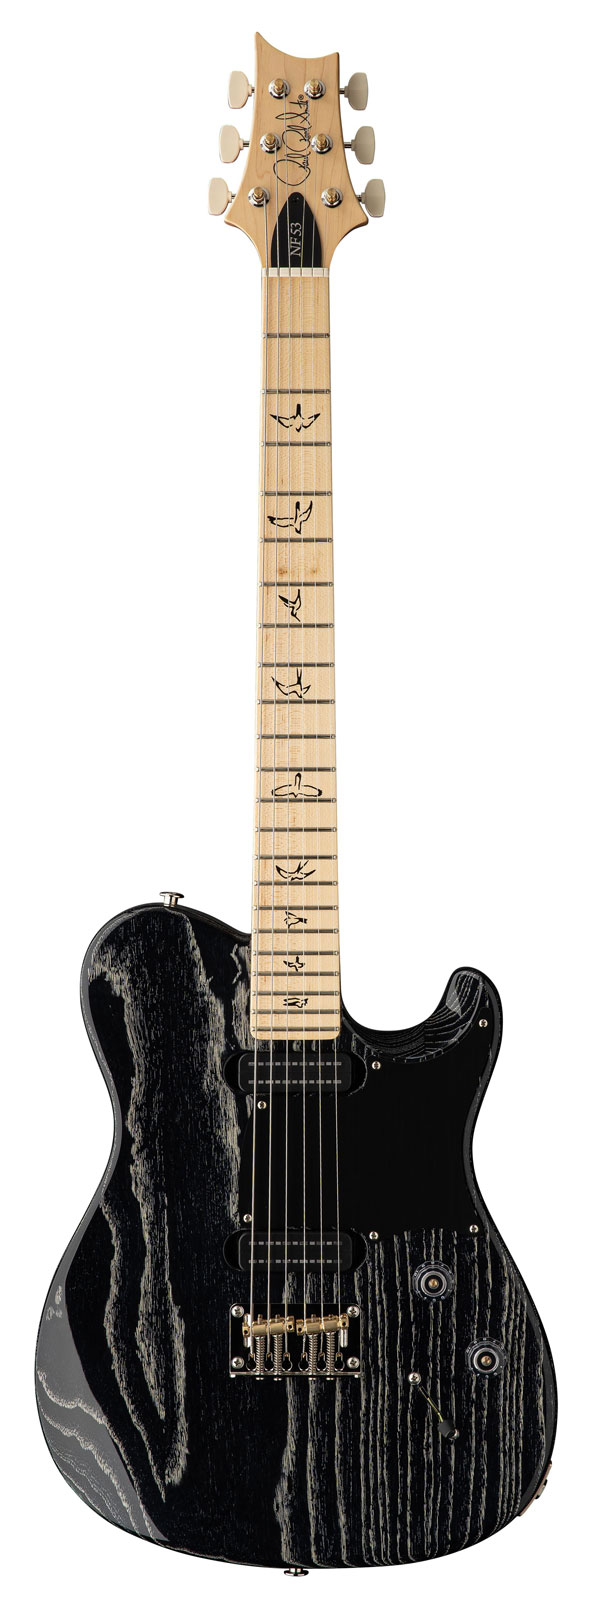 PRS - PAUL REED SMITH NF53 BLACK DOGHAIR